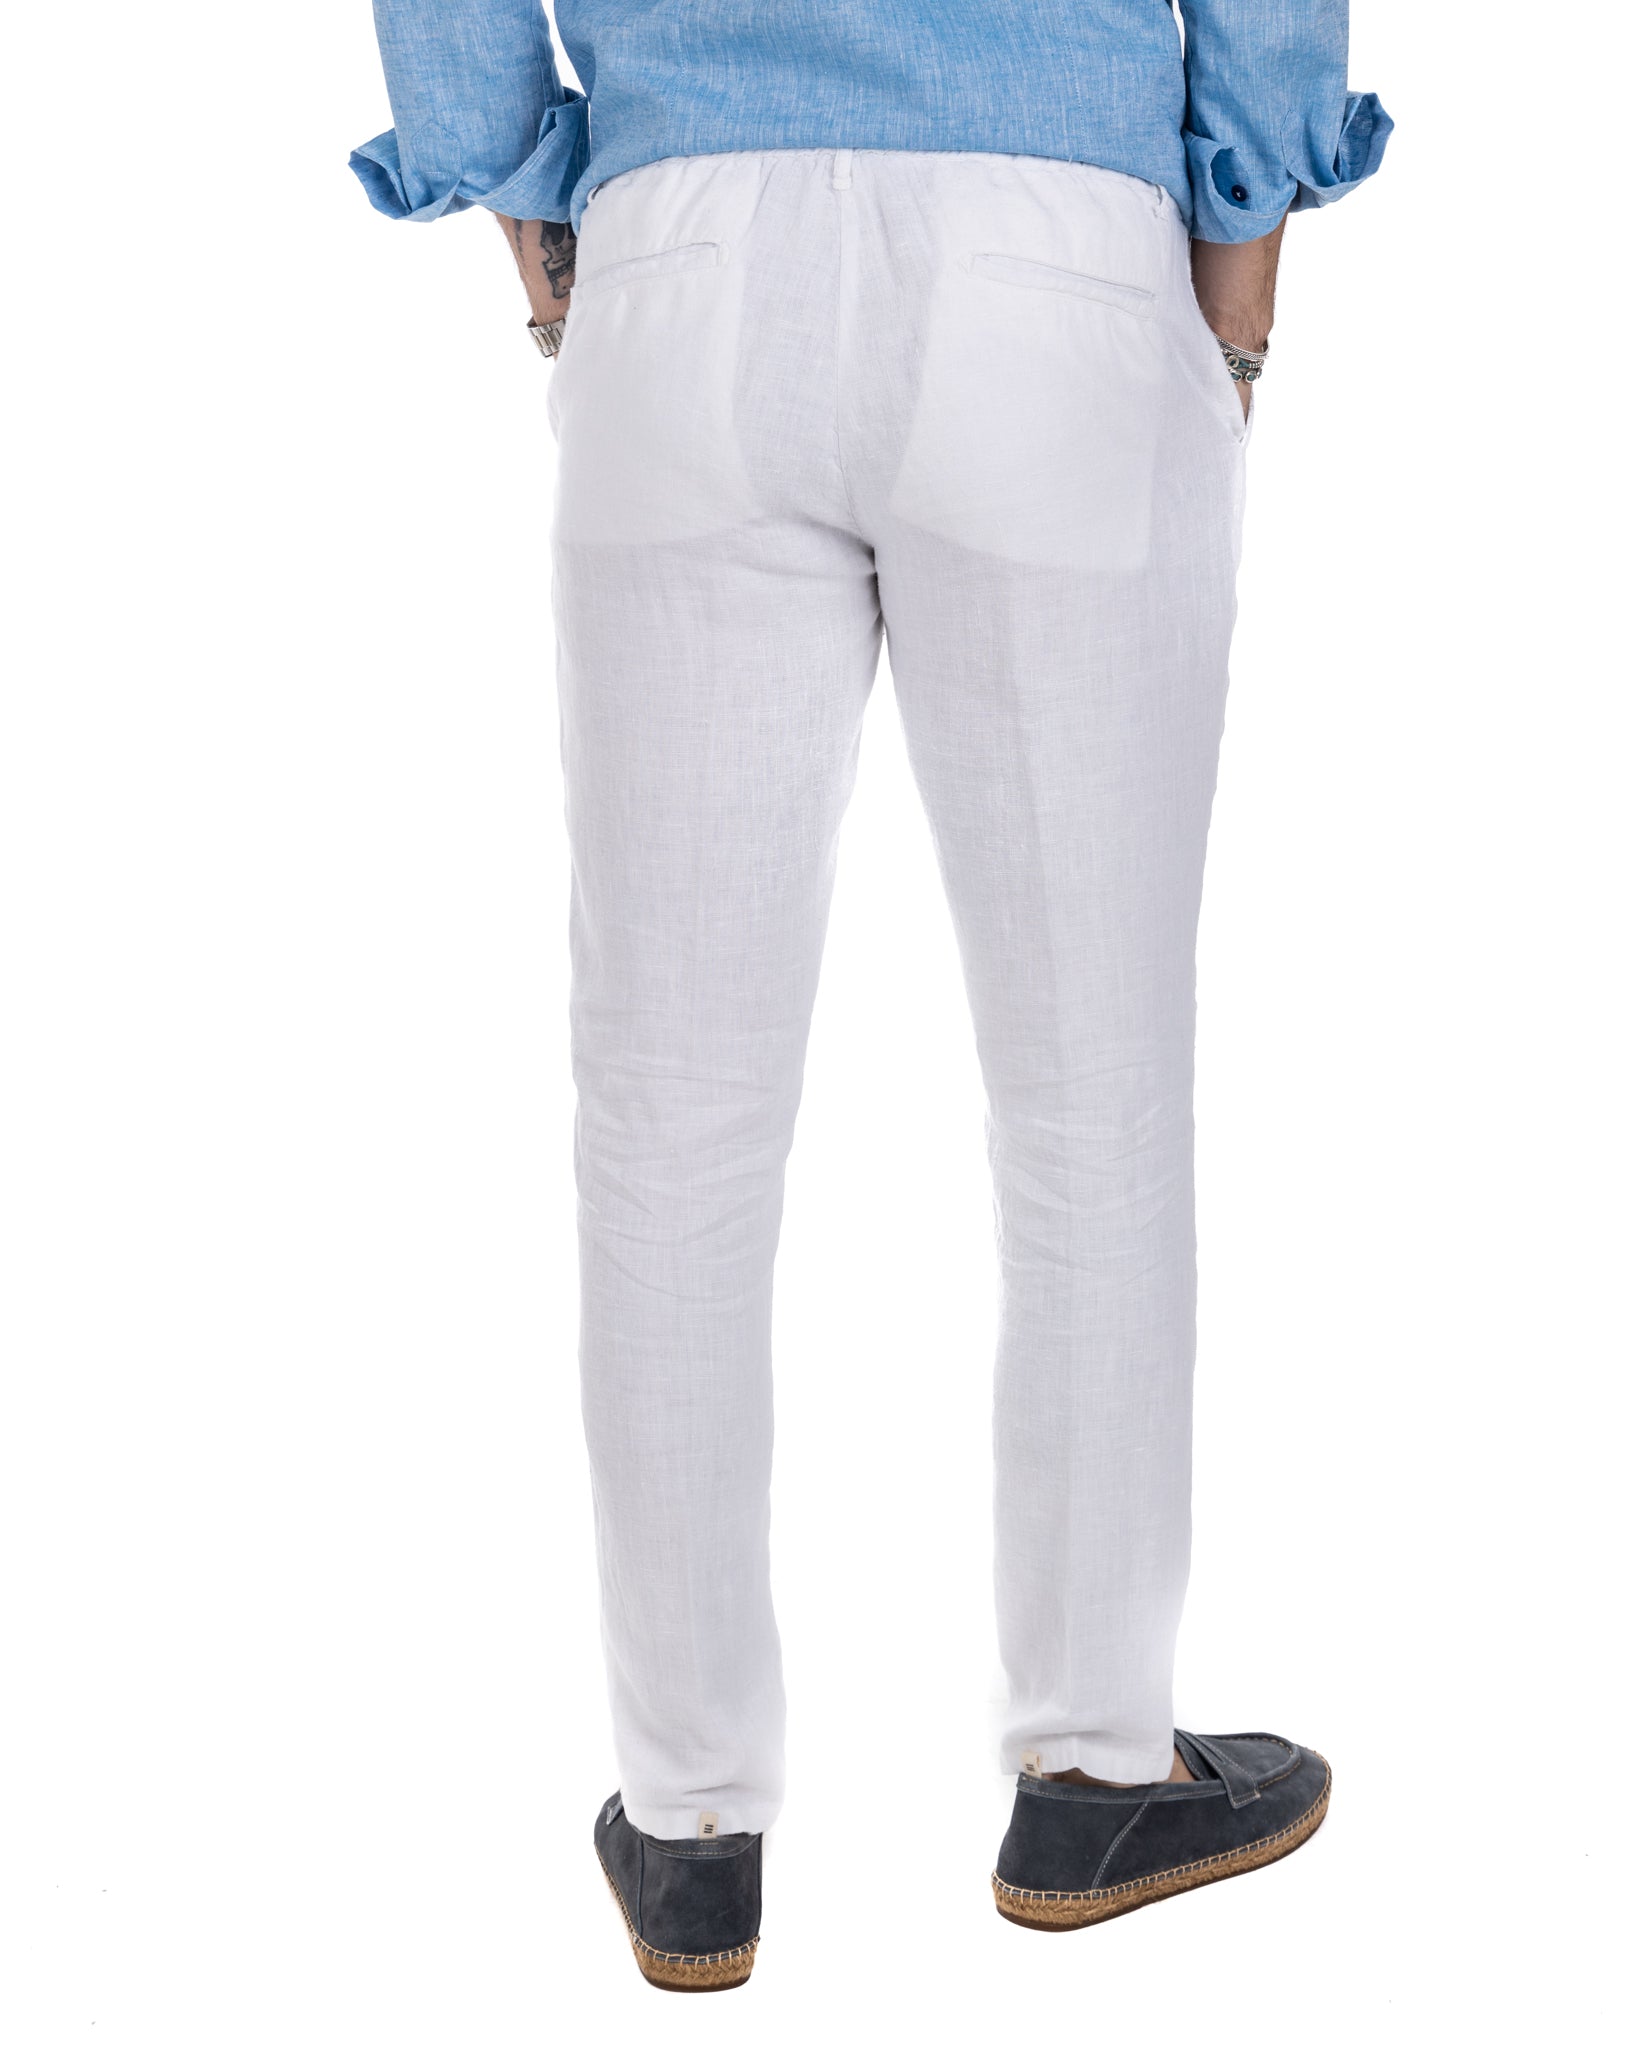 Gustave - trousers in pure white linen